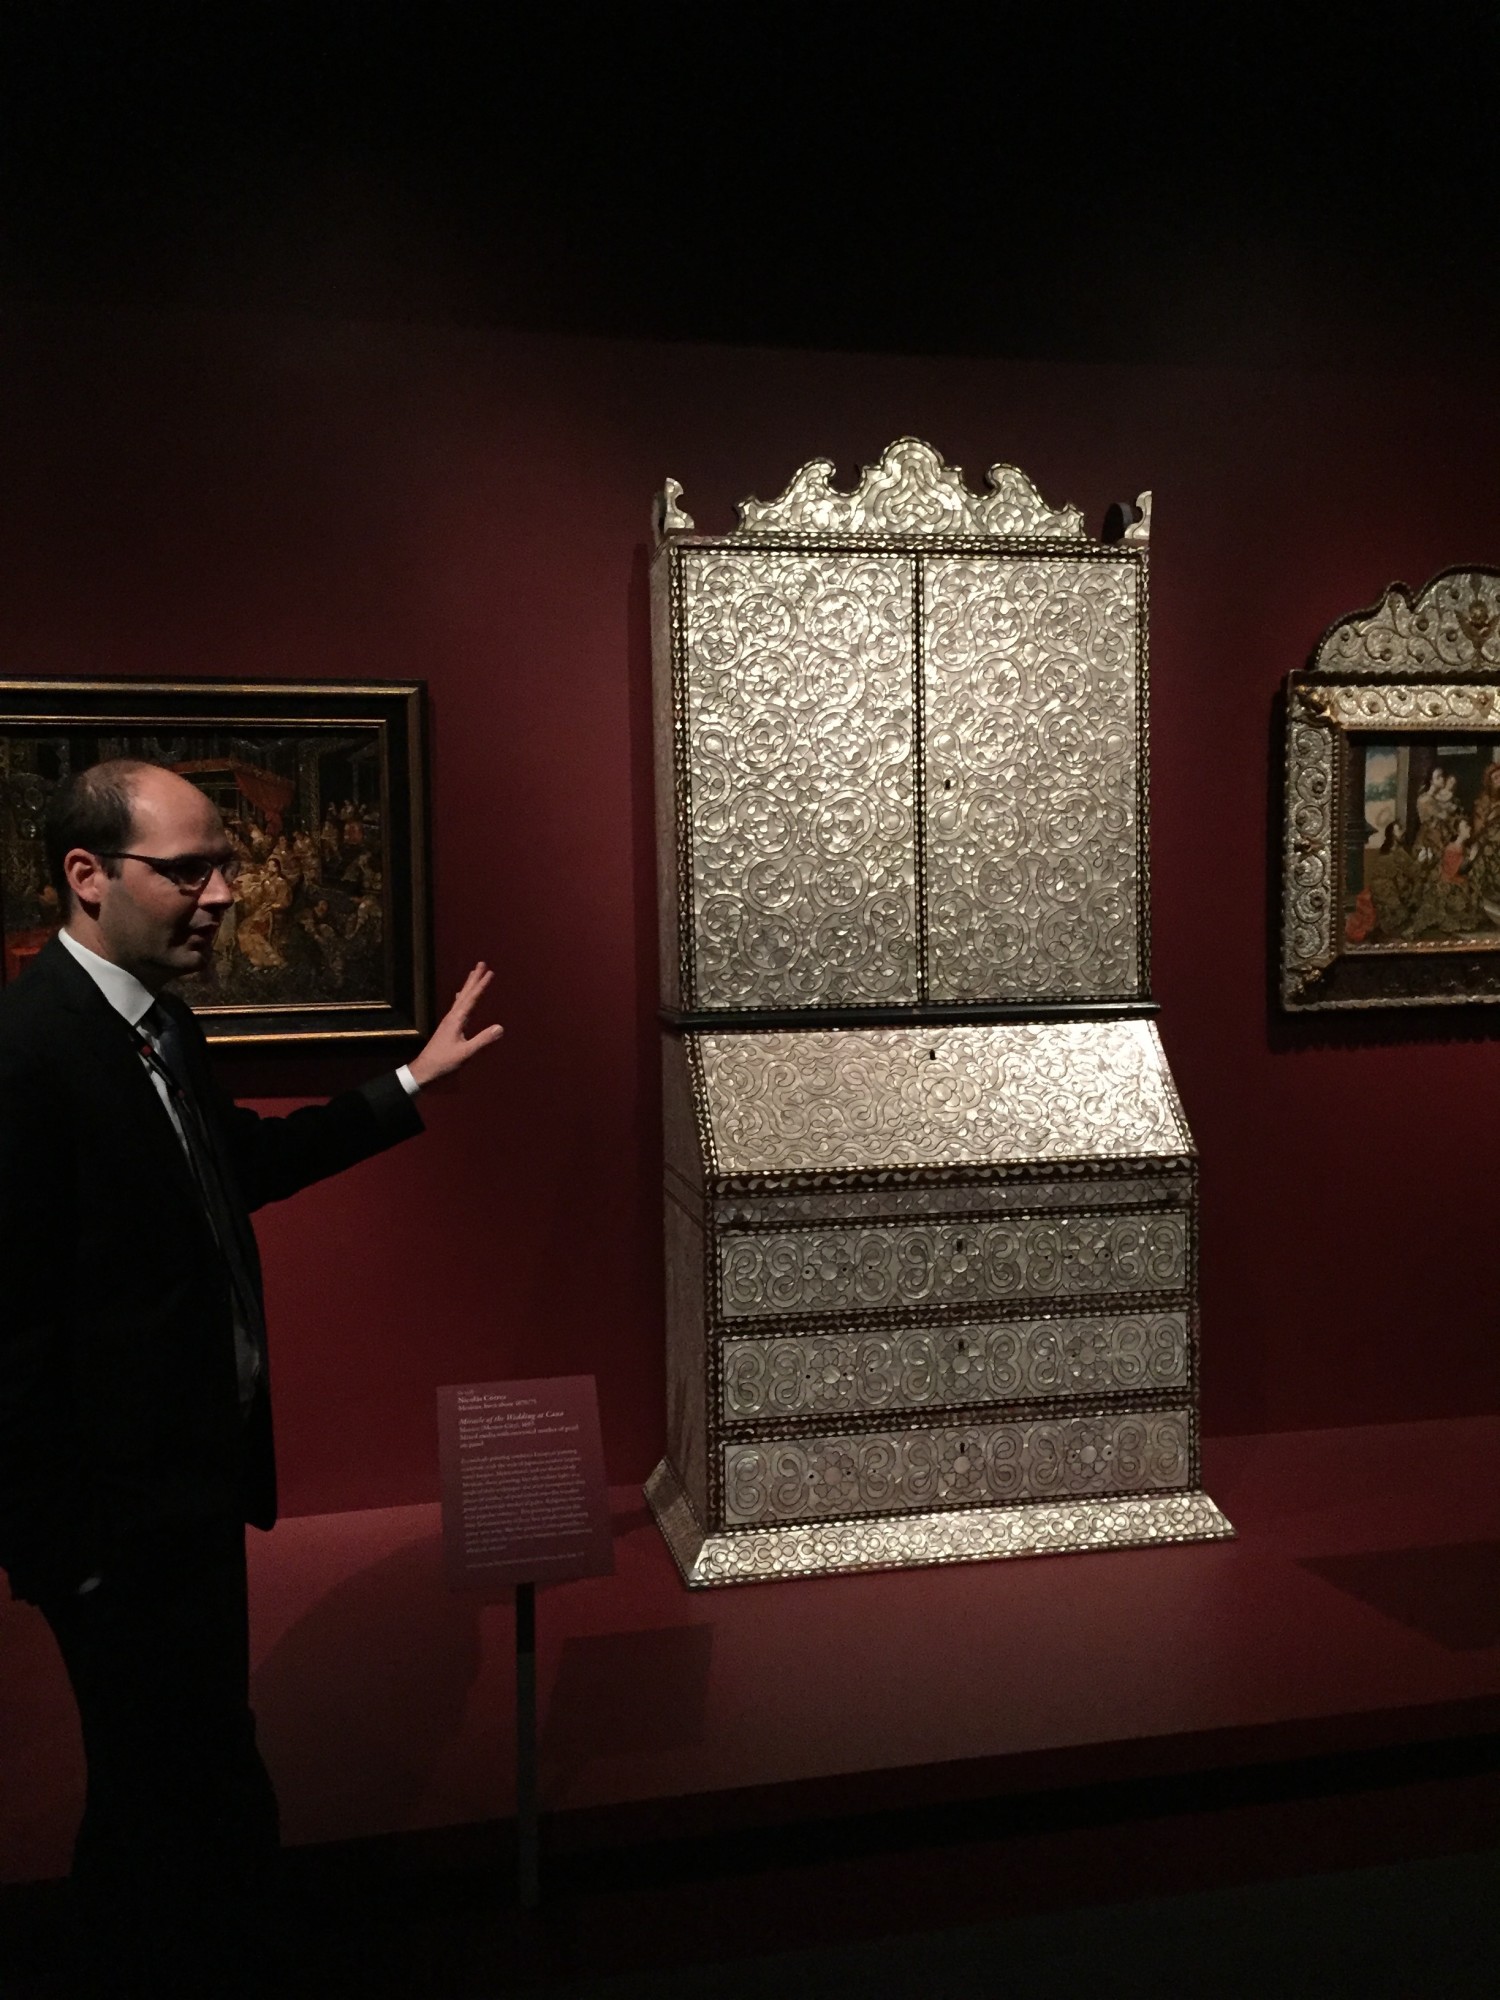 Dennis Carr standing in front of the desk from Lima, Peru, inlaid with mother-of-pearl on loan from the Newport Restoration Foundation